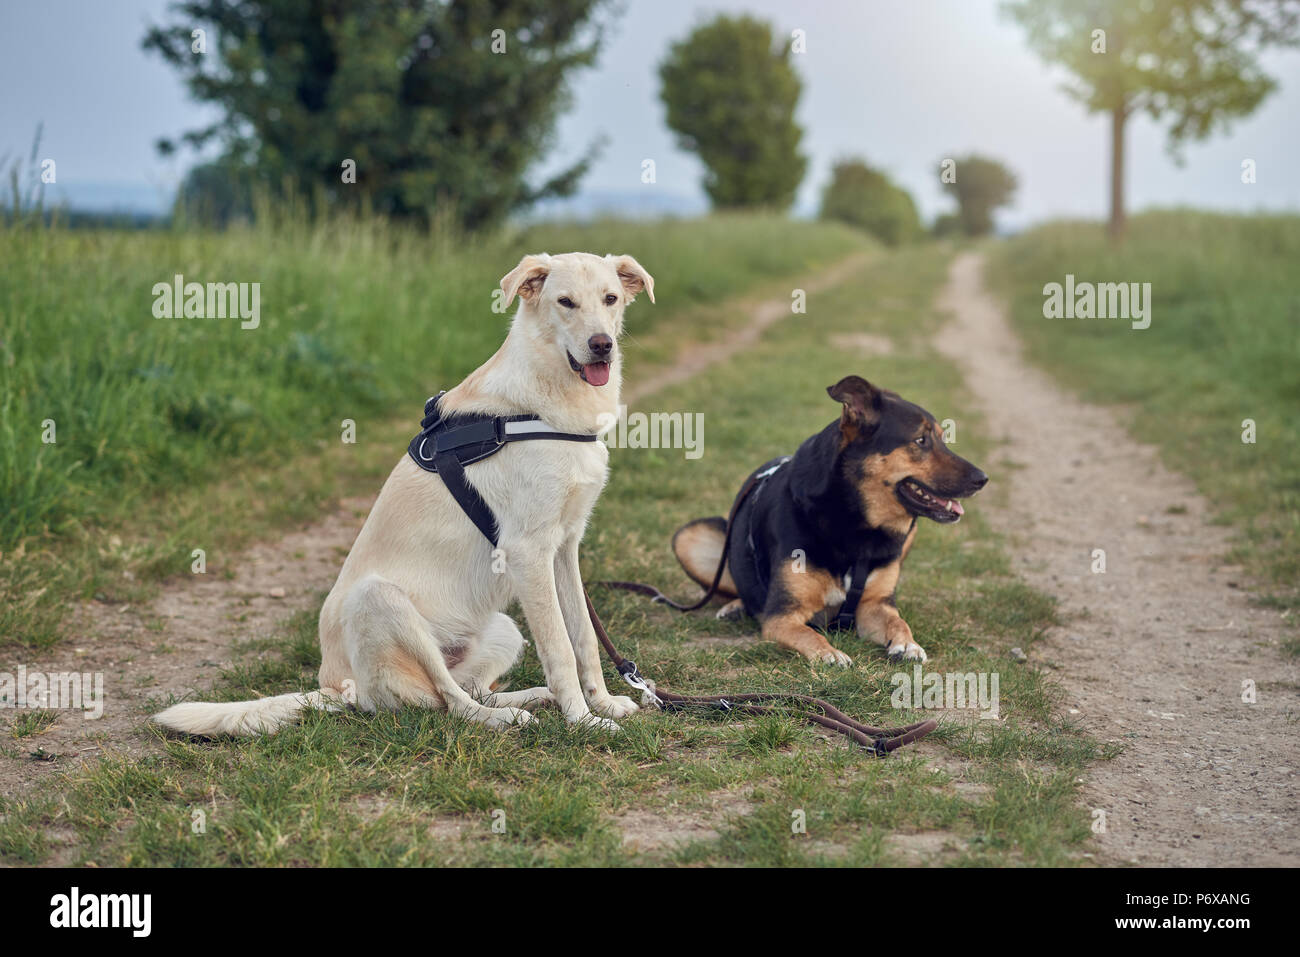 Portrait of two large dogs wearing harnesses resting in rural road during walk Stock Photo